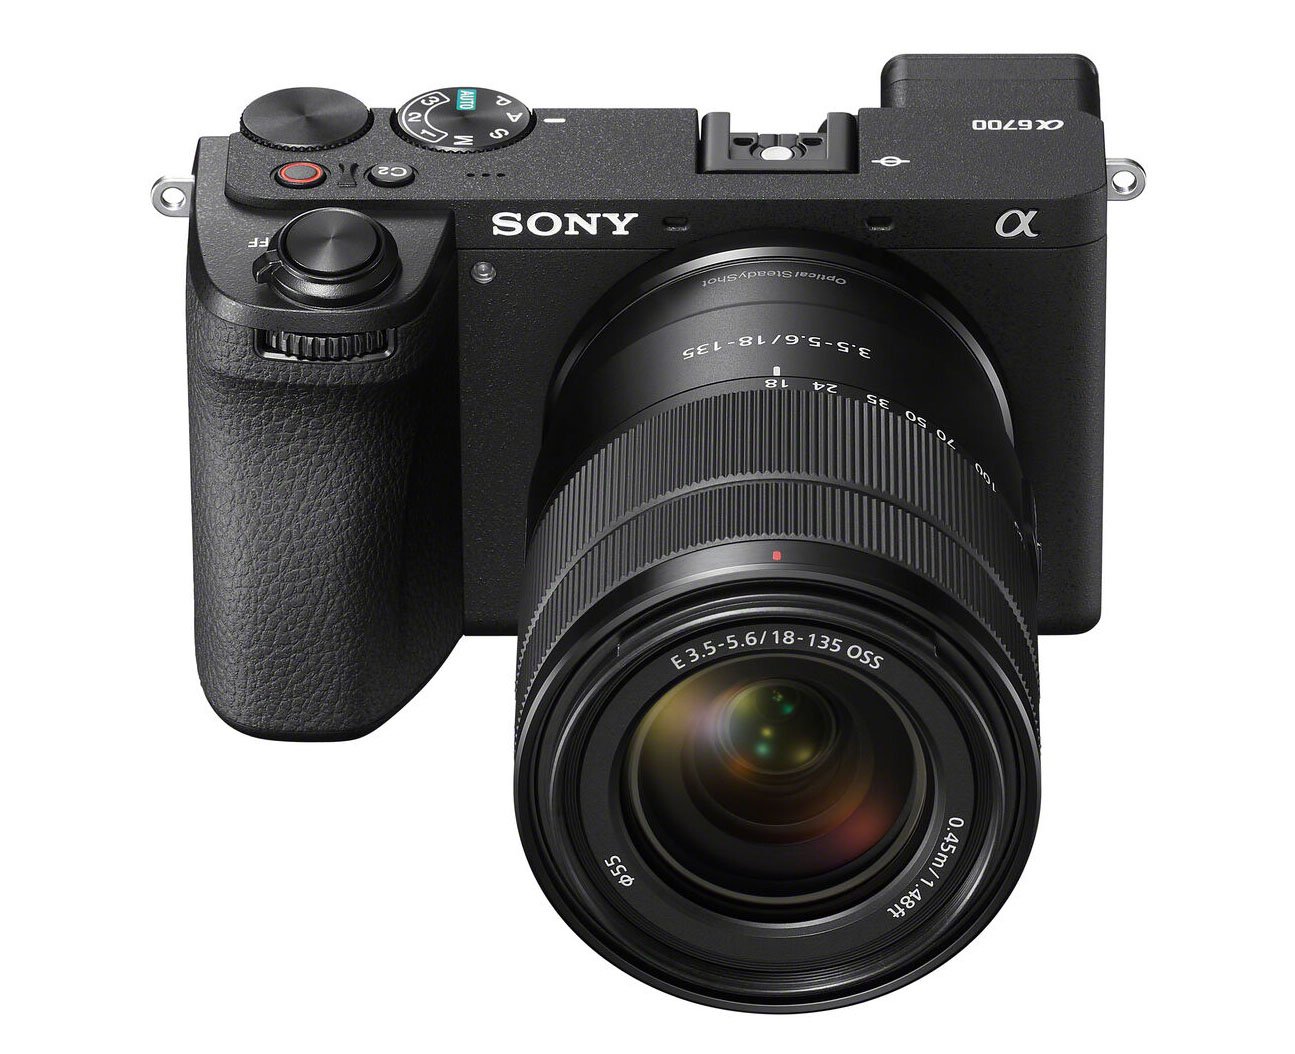 Sony A6600 vs A6700 - The 10 Main Differences - Mirrorless Comparison